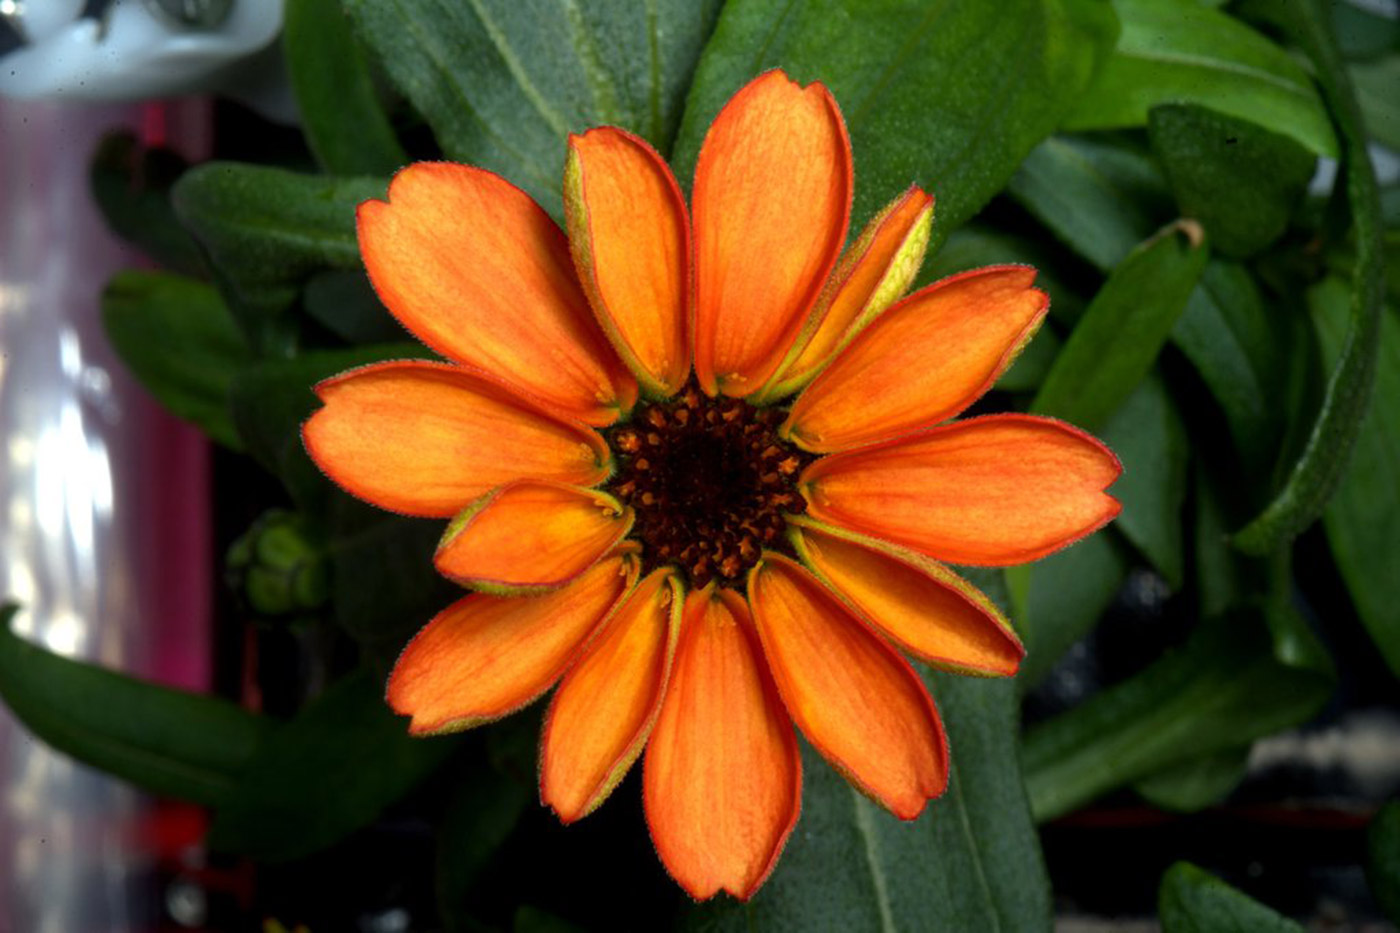 Astronauts grow their first flower in space